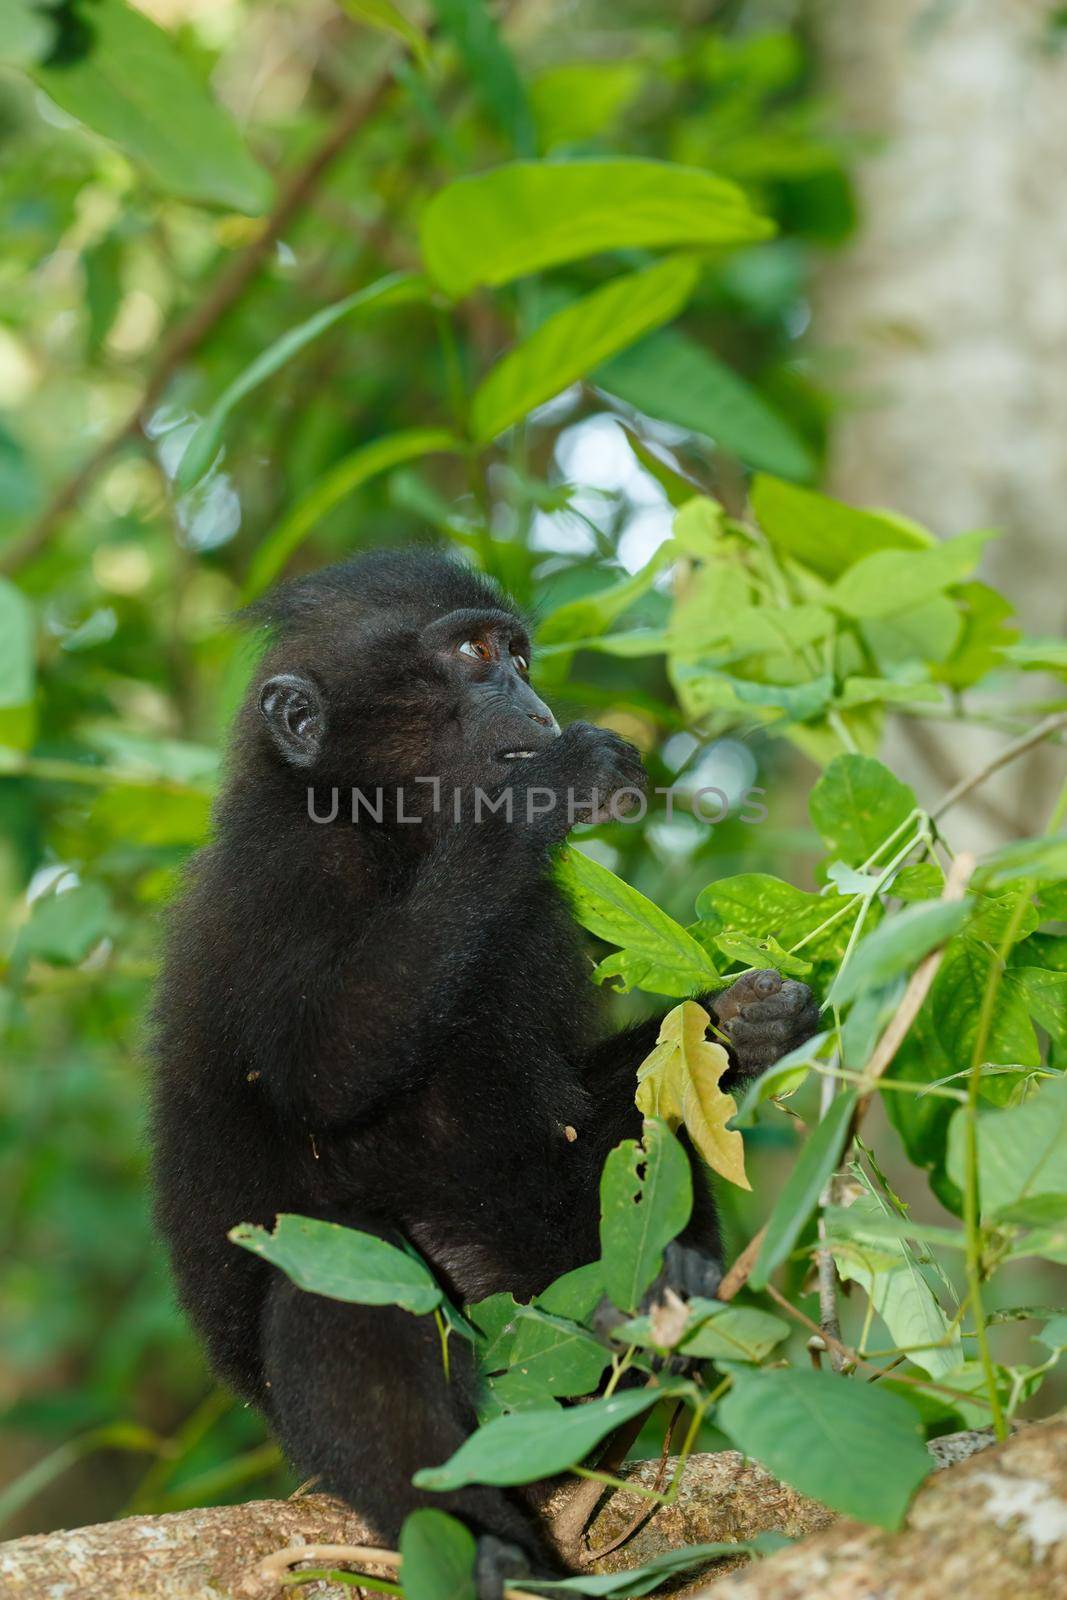 Endemic monkey Celebes crested macaque (Macaca nigra) known as black monkey on tree in in rainforest, Tangkoko Nature Reserve in North Sulawesi, Indonesia wildlife